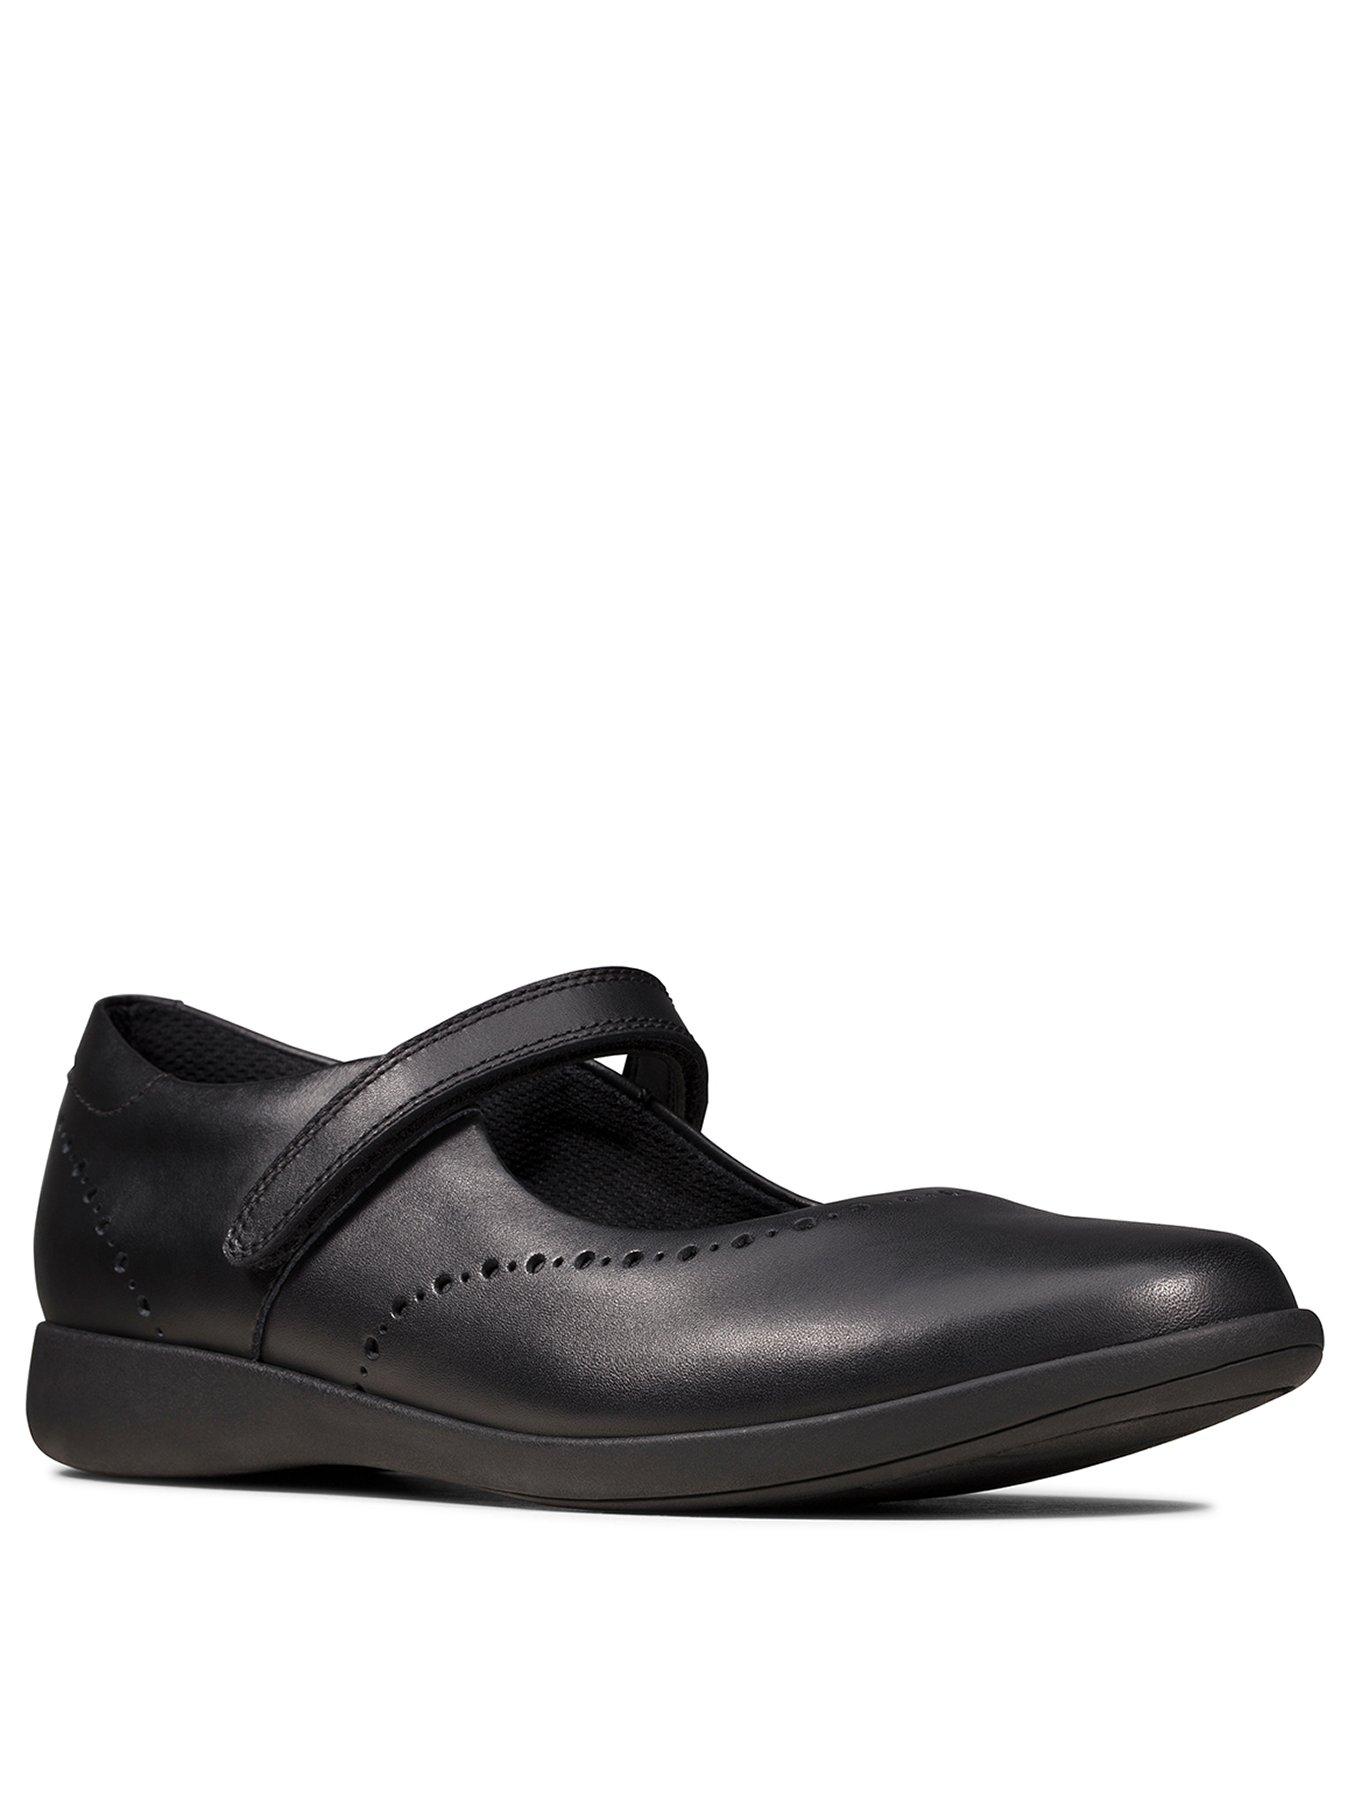 clarks school shoes clearance